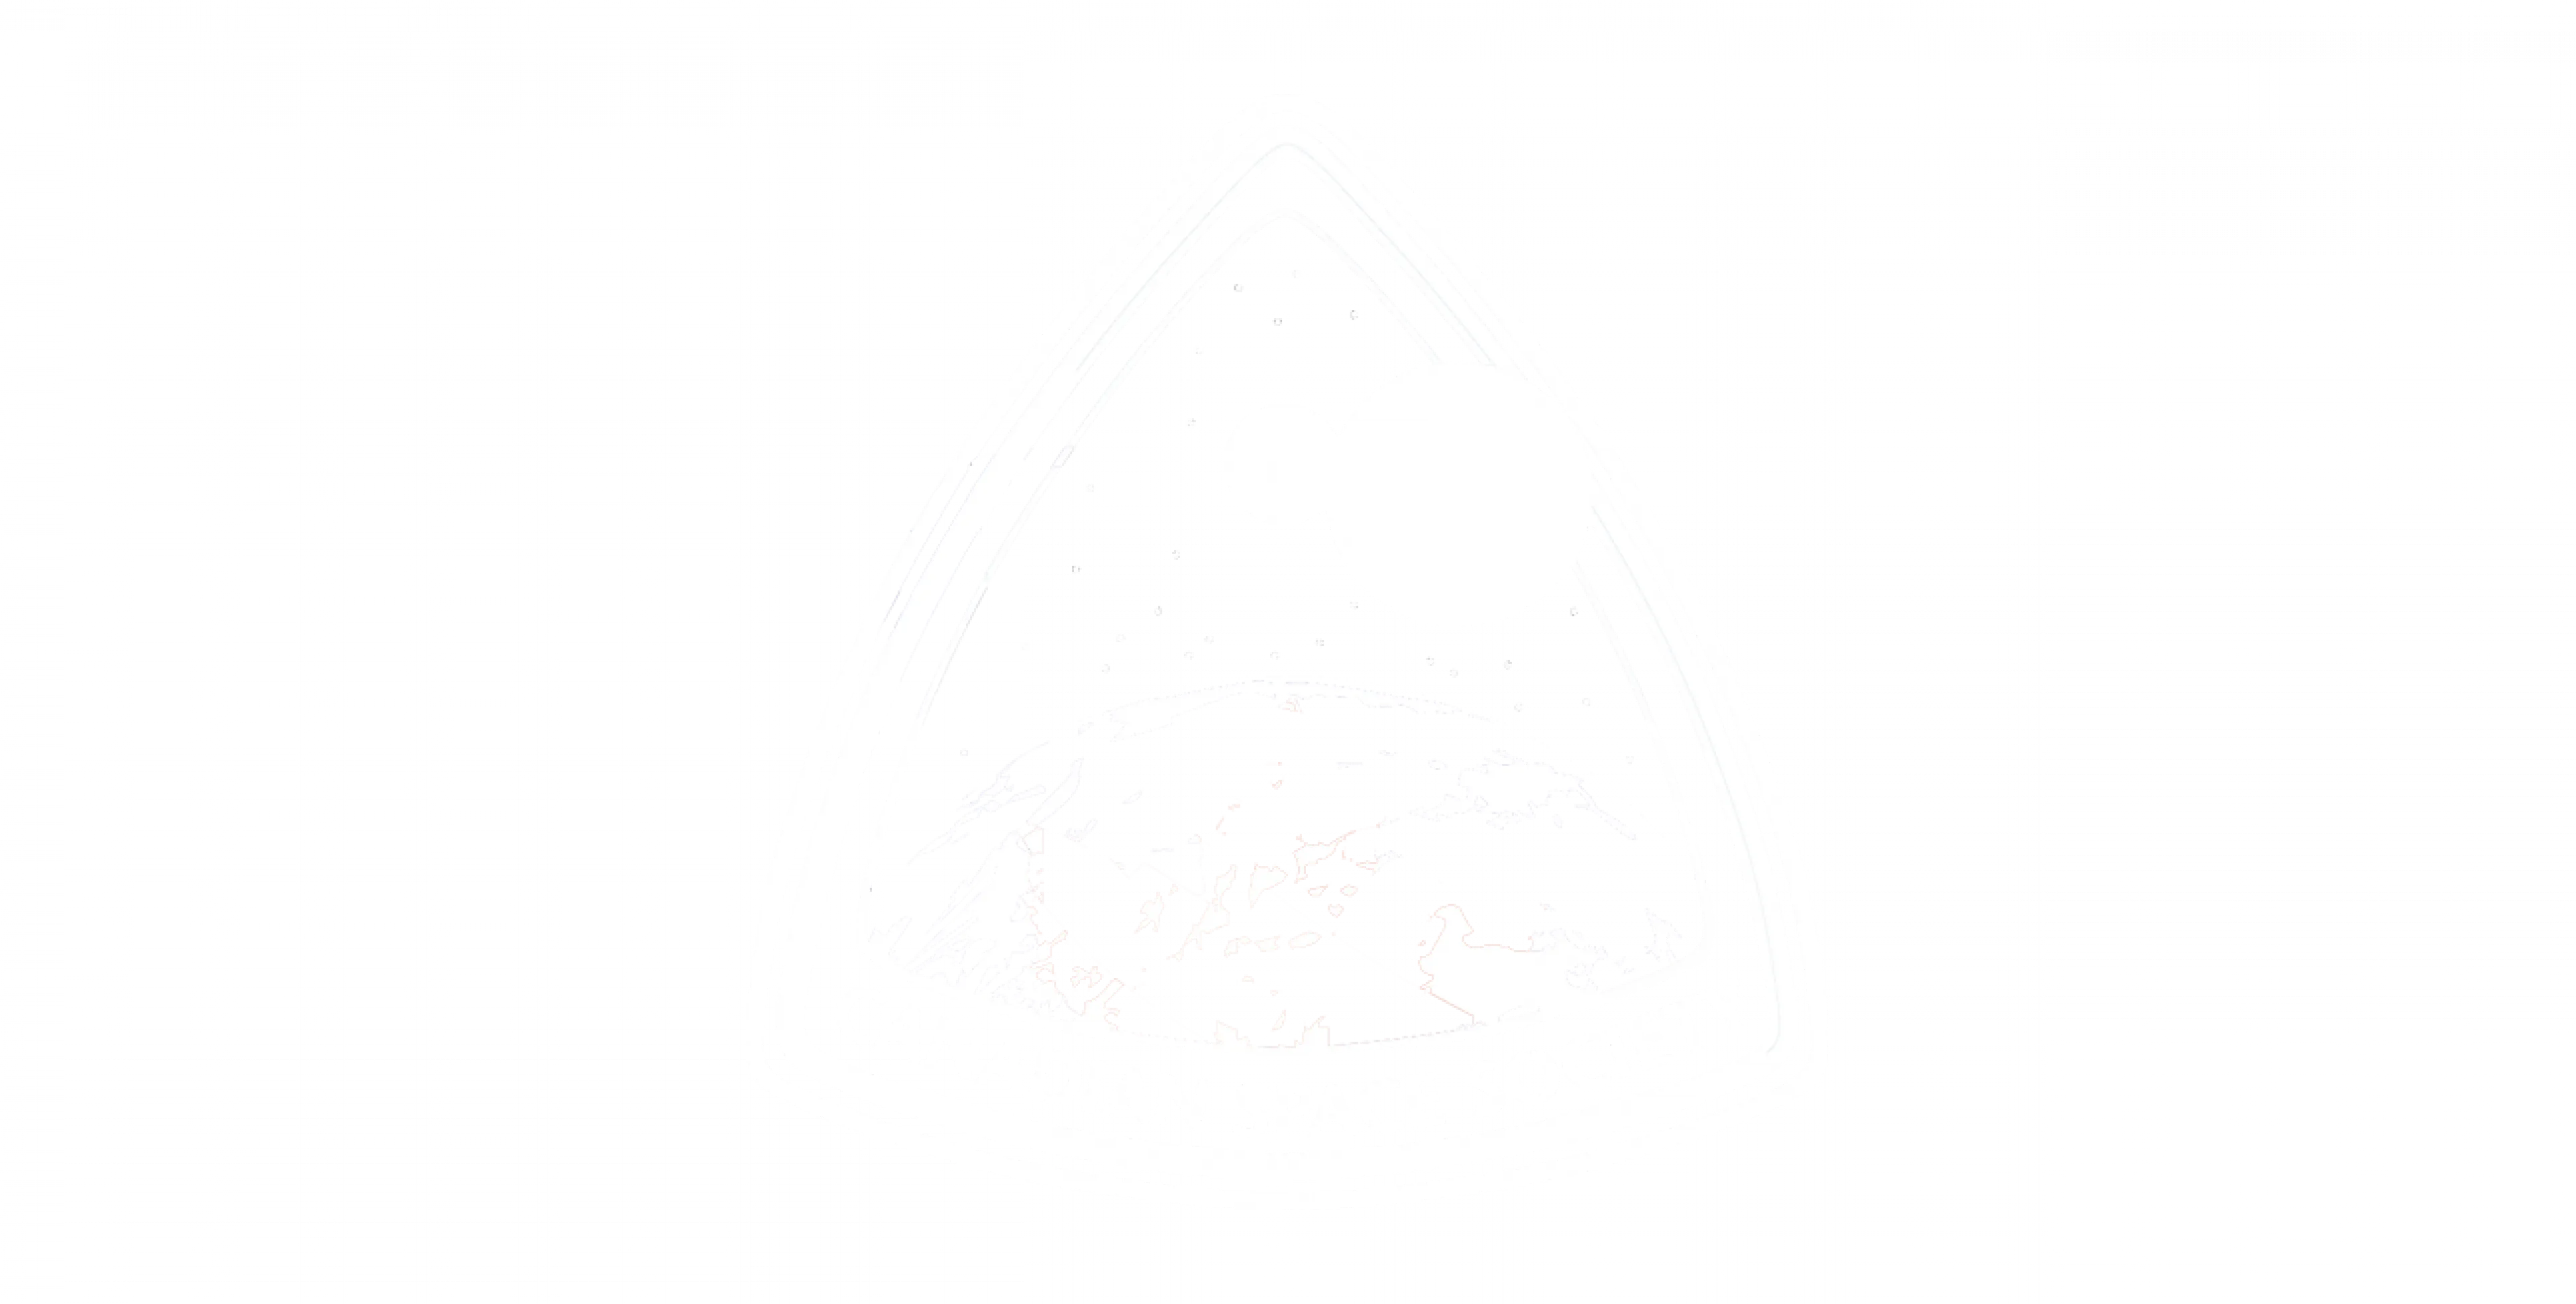 Canadian Space Society